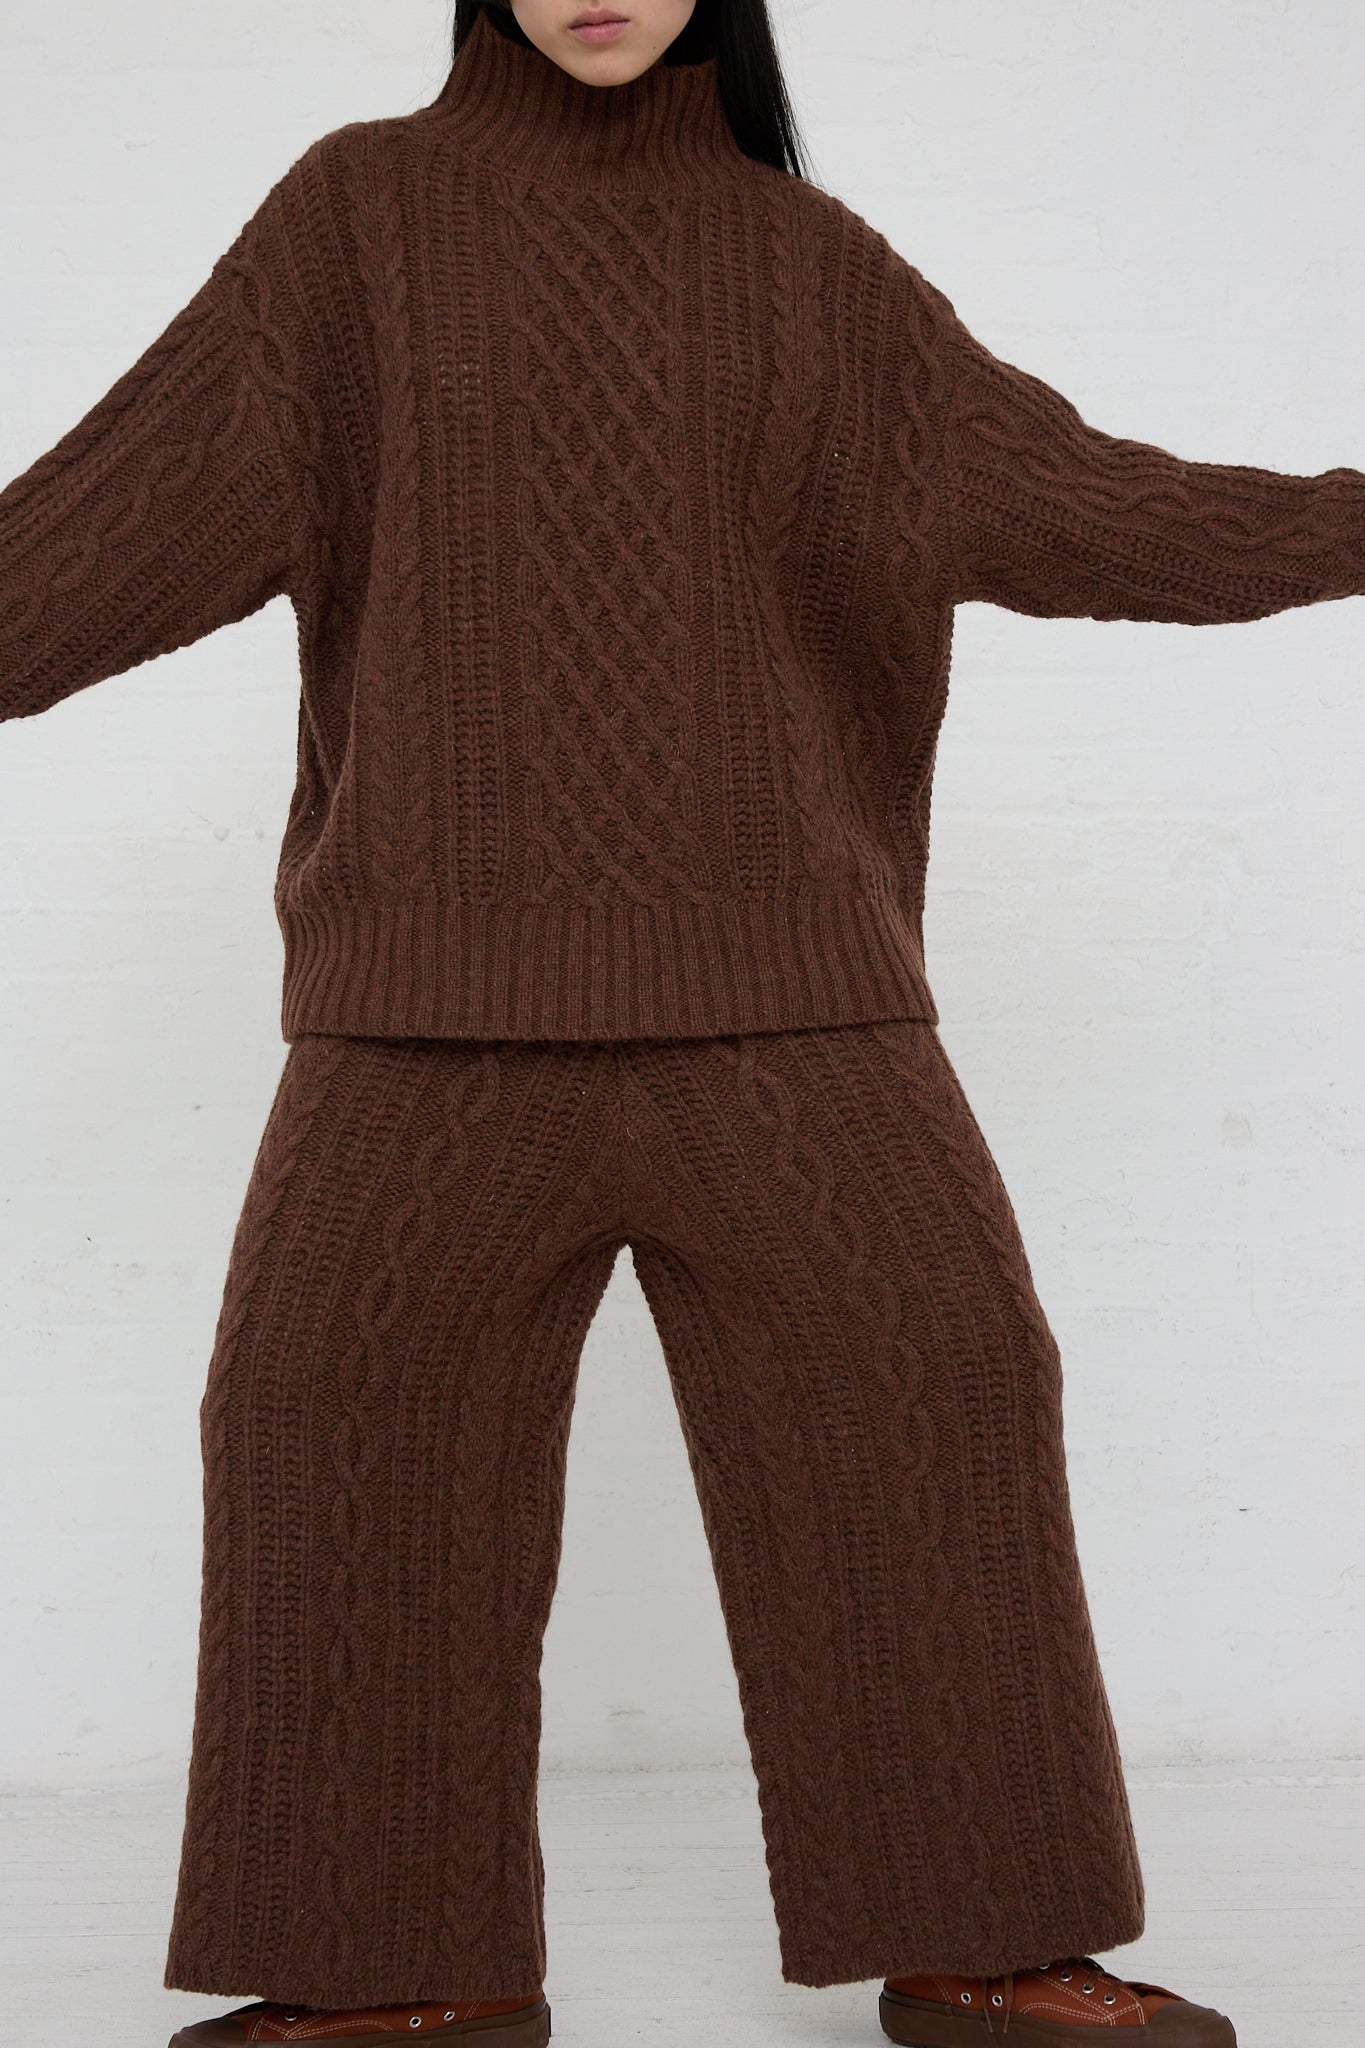 A woman wearing Ichi's Knit Pant in Brown. Full-length front view.